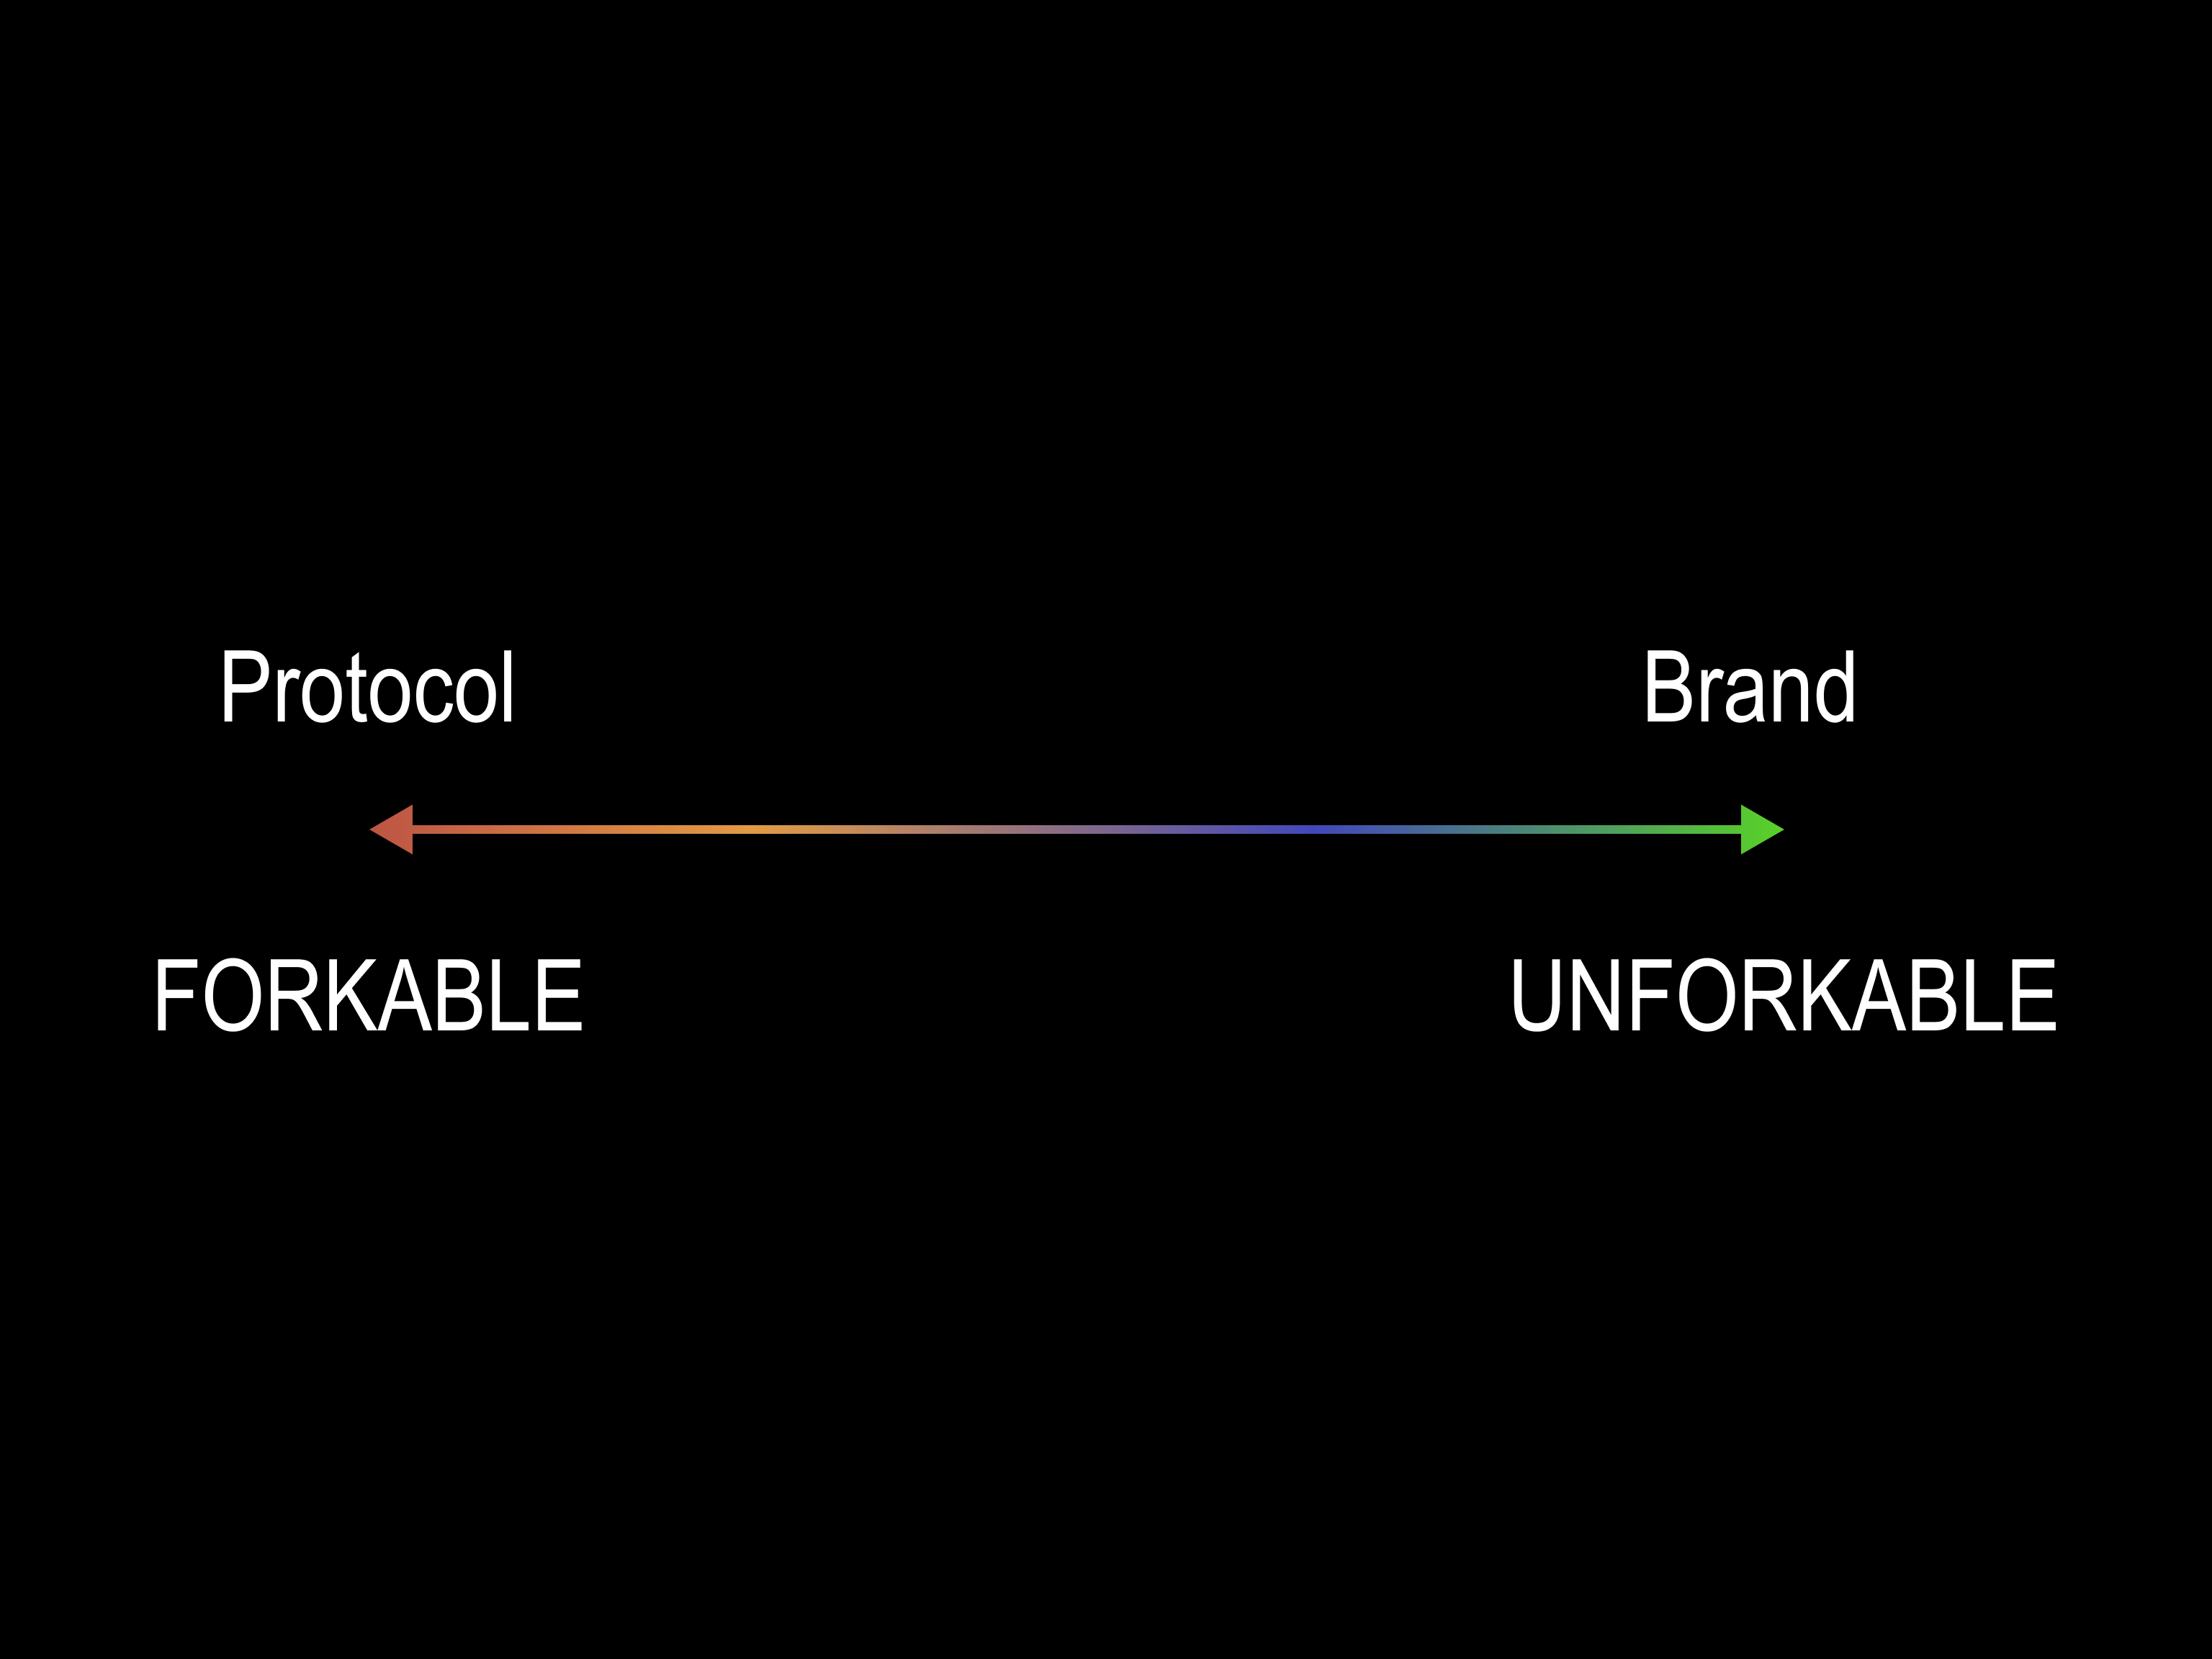 The Forkability Spectrum: the most forklable things are protocols, the least forkable things are brands.